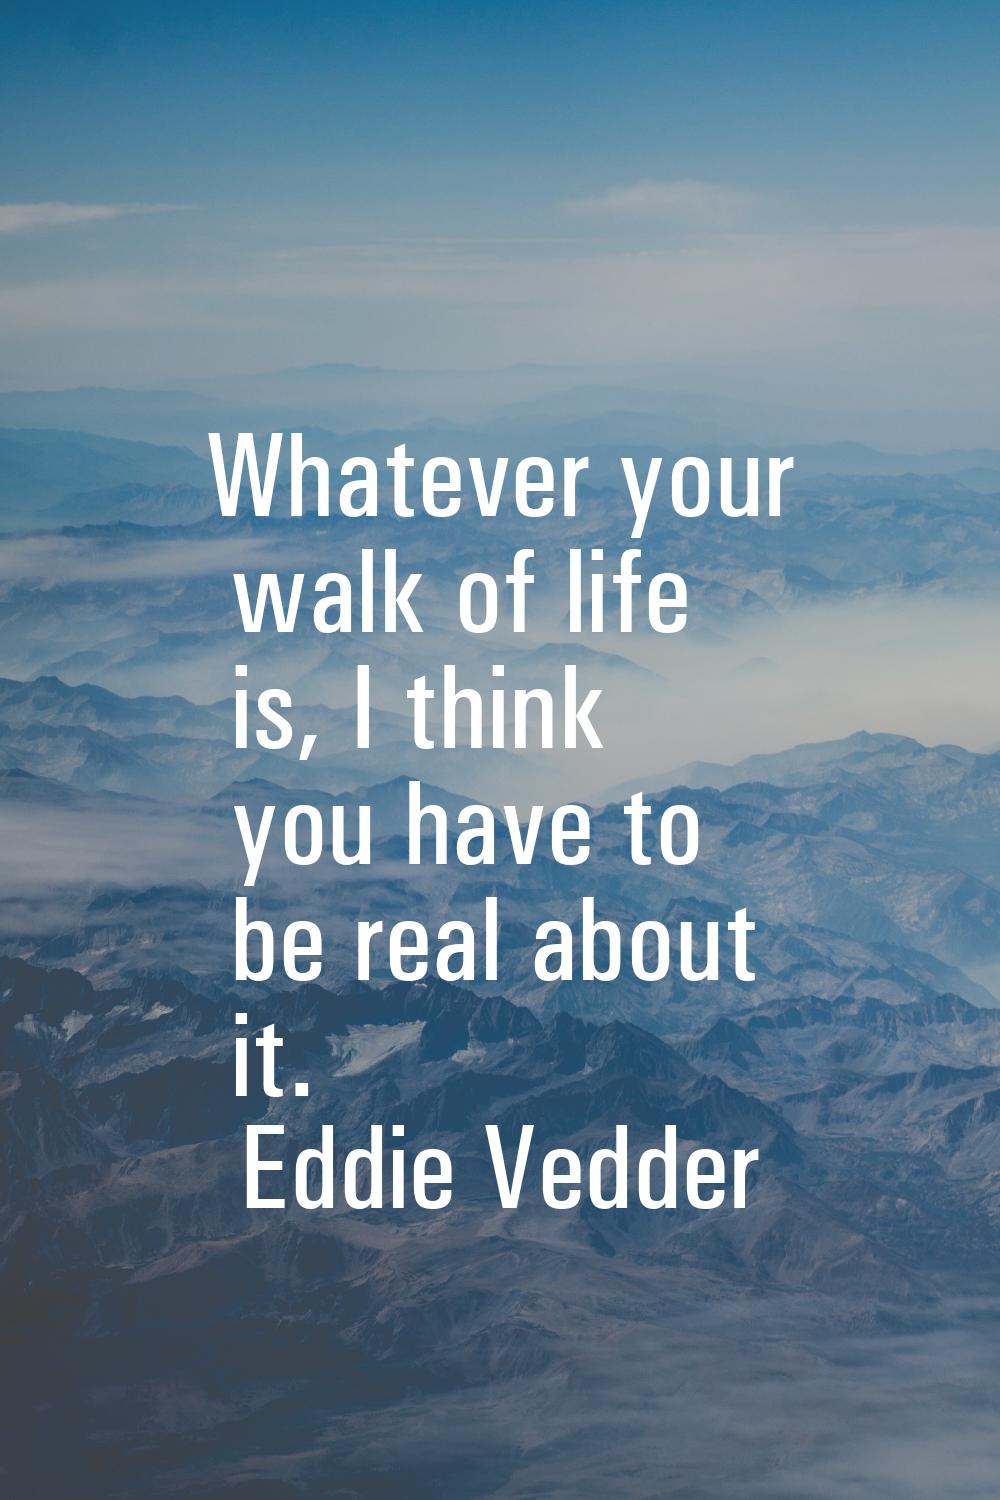 Whatever your walk of life is, I think you have to be real about it.